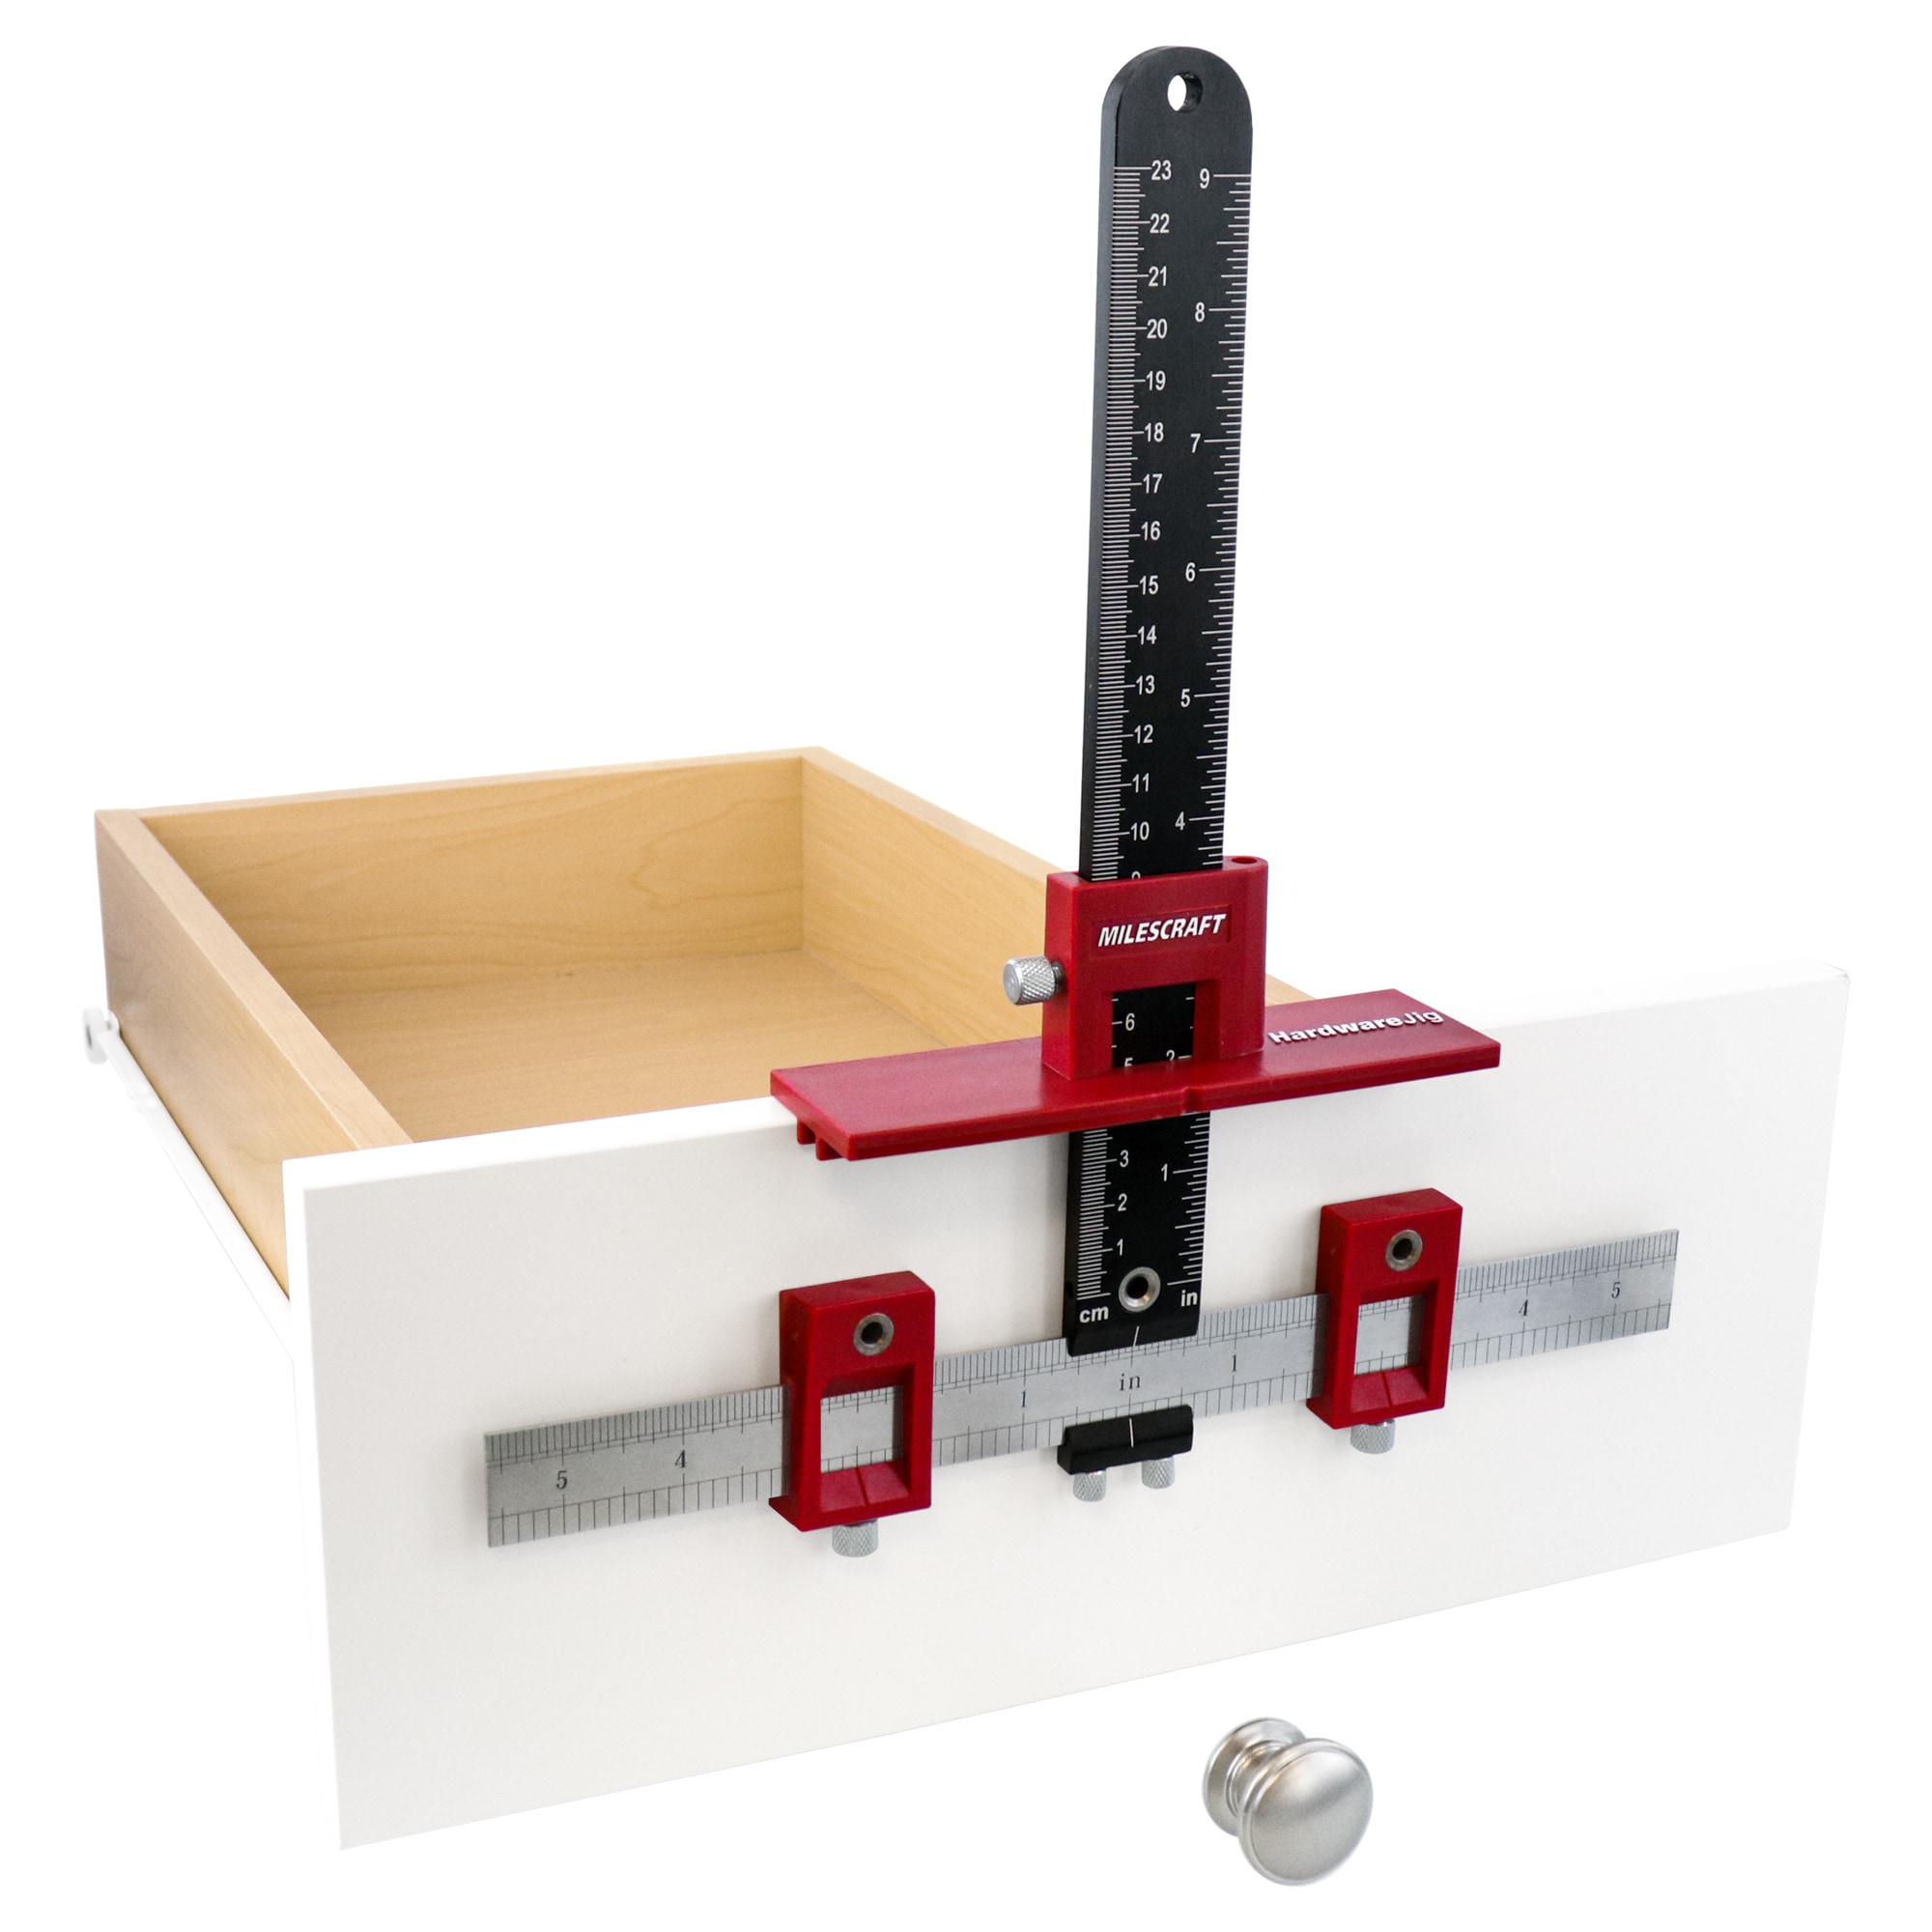 Kreg Adjustable Cabinet Hardware Jig for Accurate Hole Placement